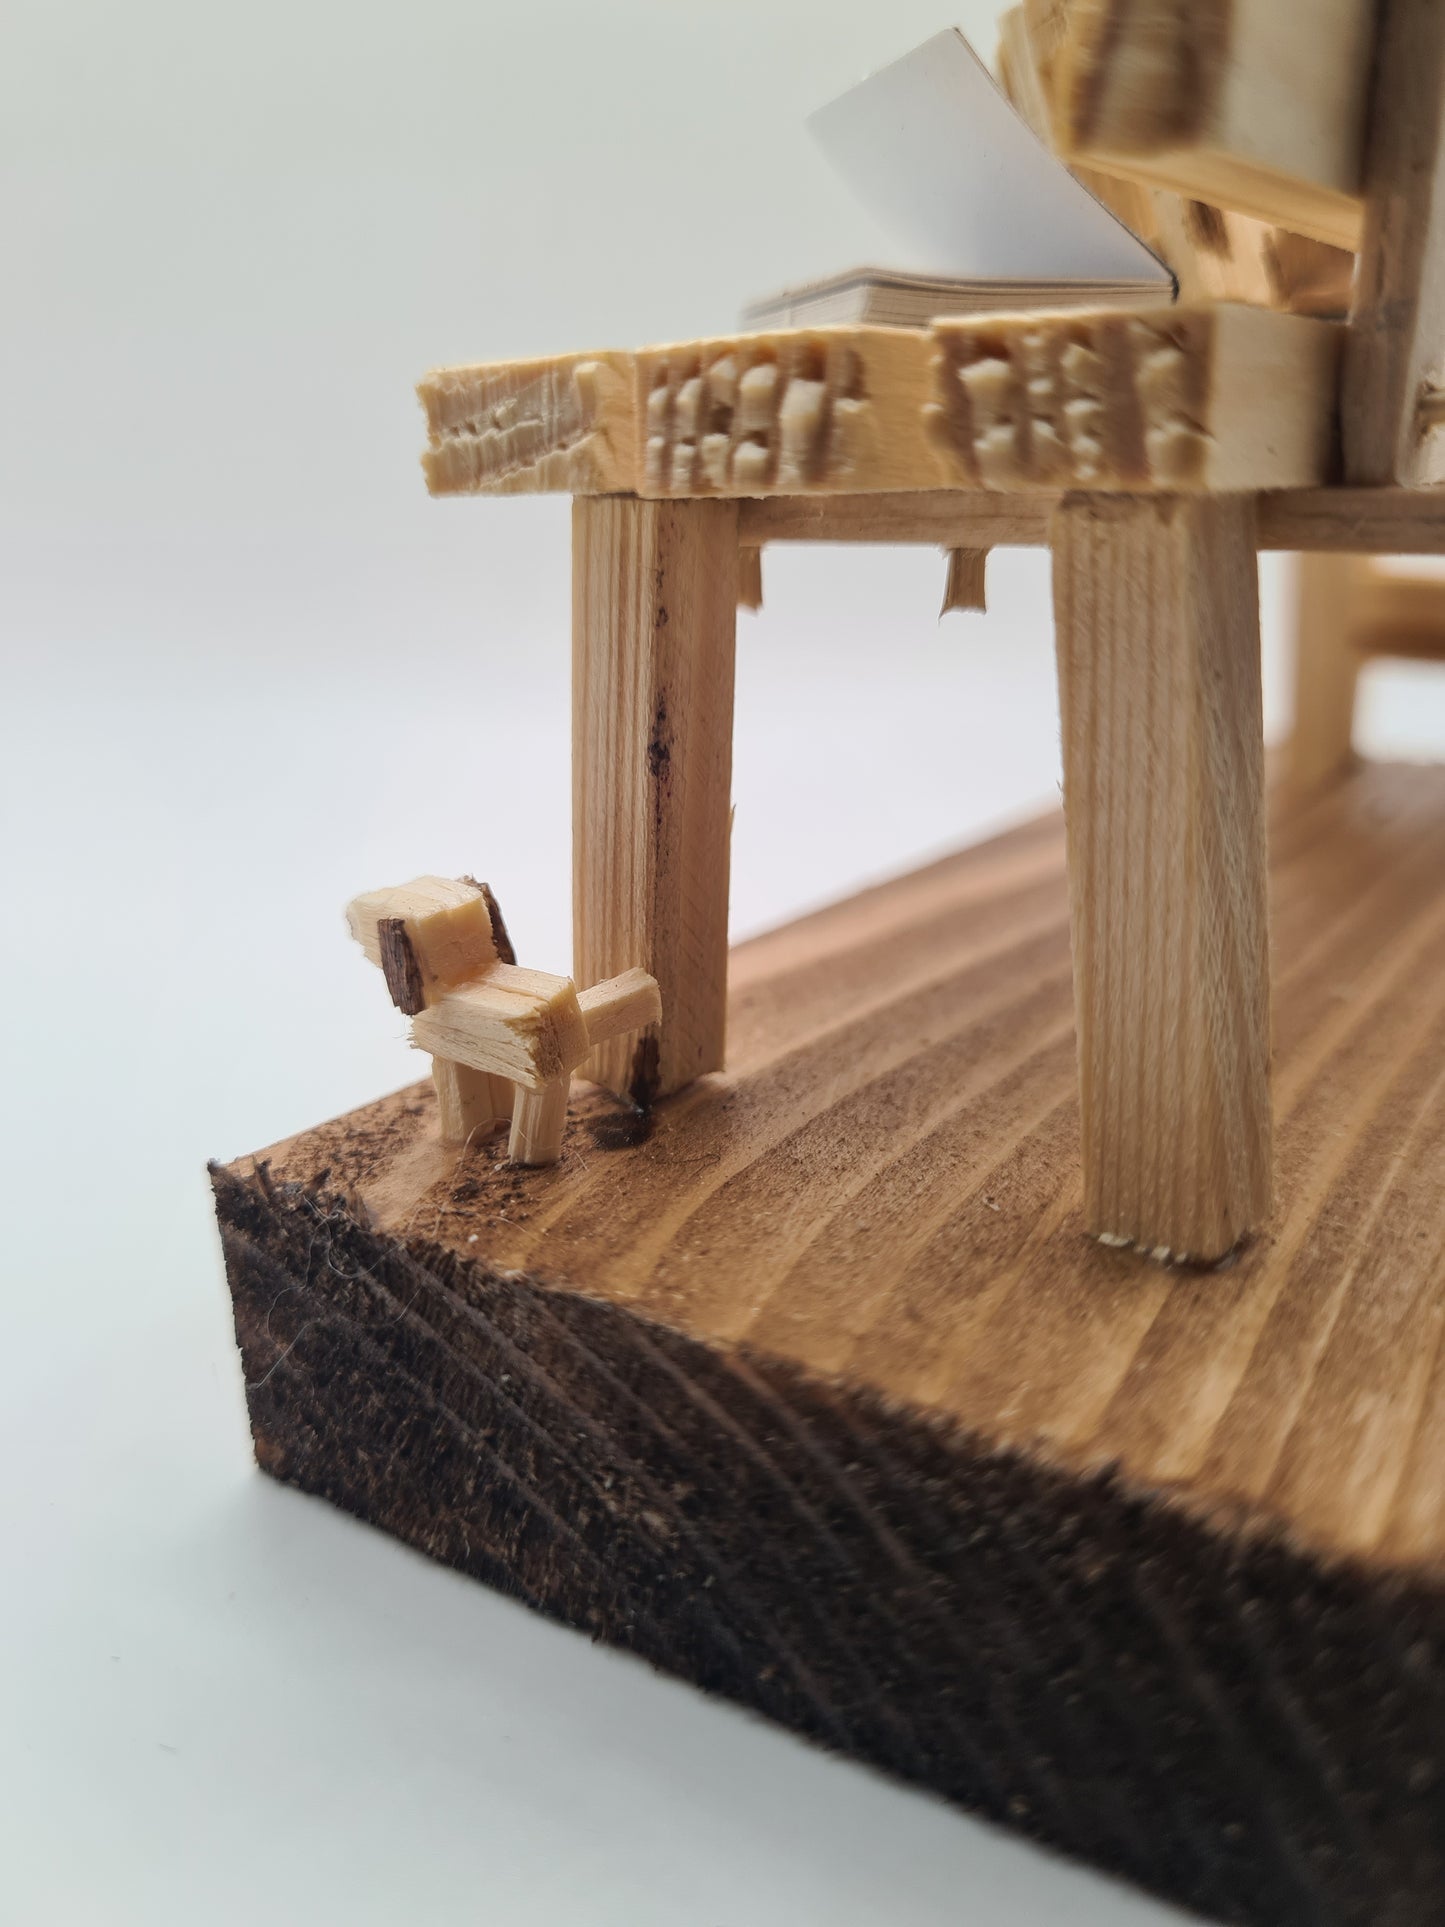 Doggos Take Over The Bench - Handcrafted Wooden Matchstick Figures - Gifts, Ornaments and Decor By Tiggidy Designs